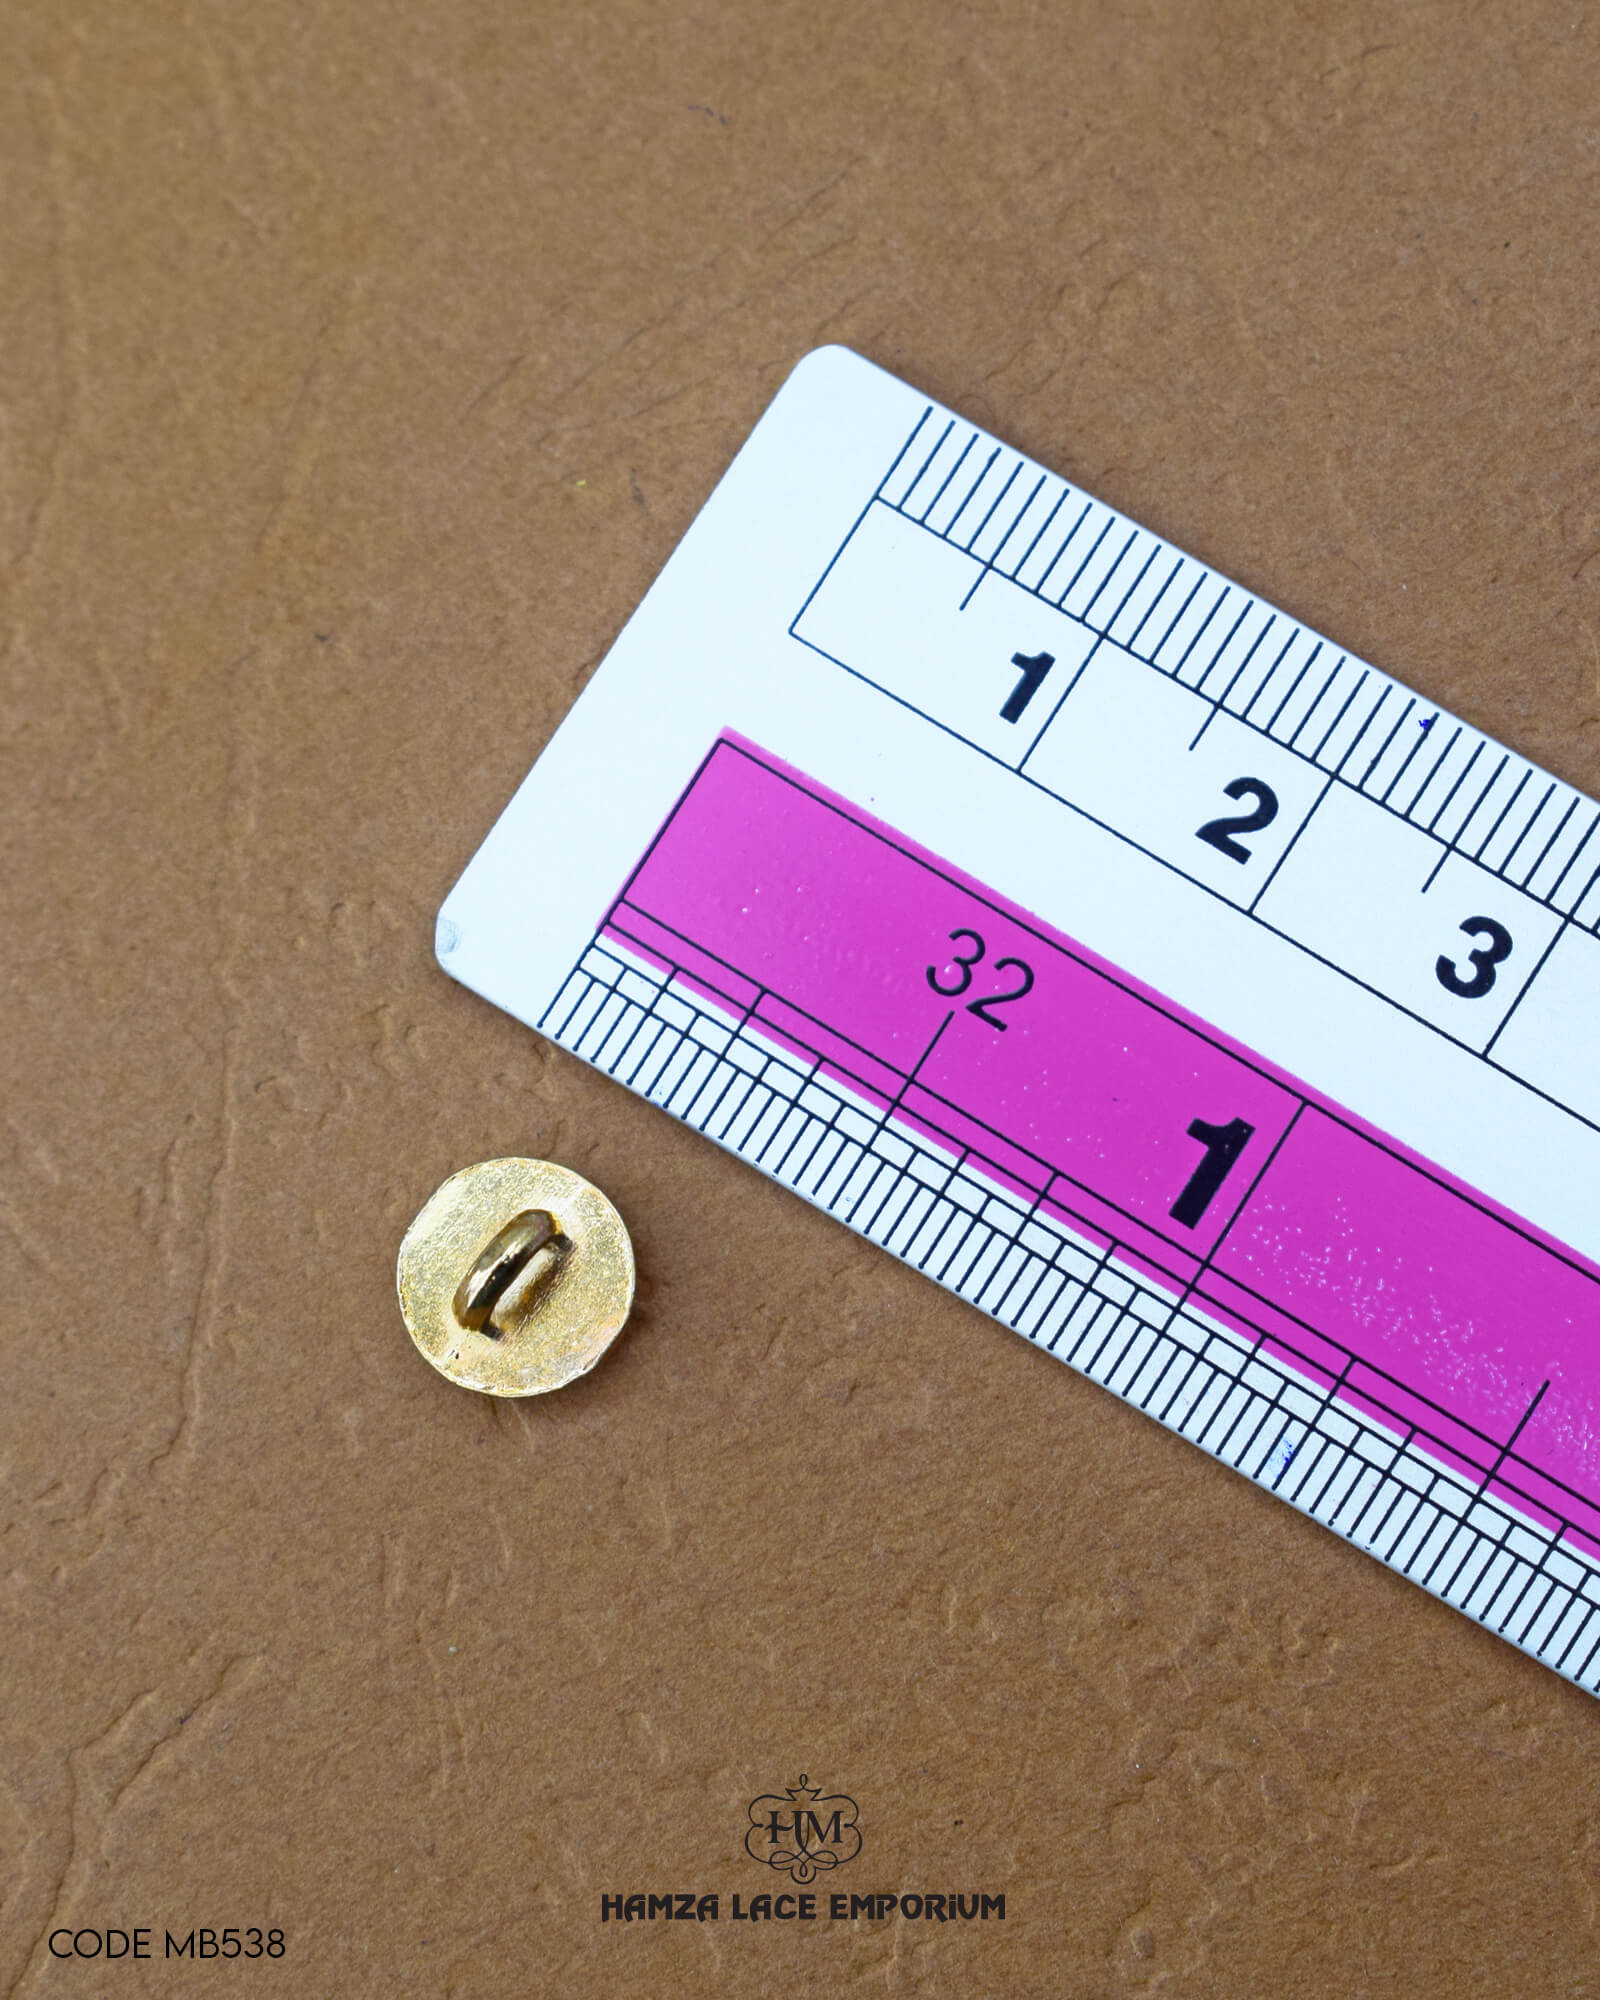 The size of the 'Metal Suiting Button MB544' is measured by using a ruler